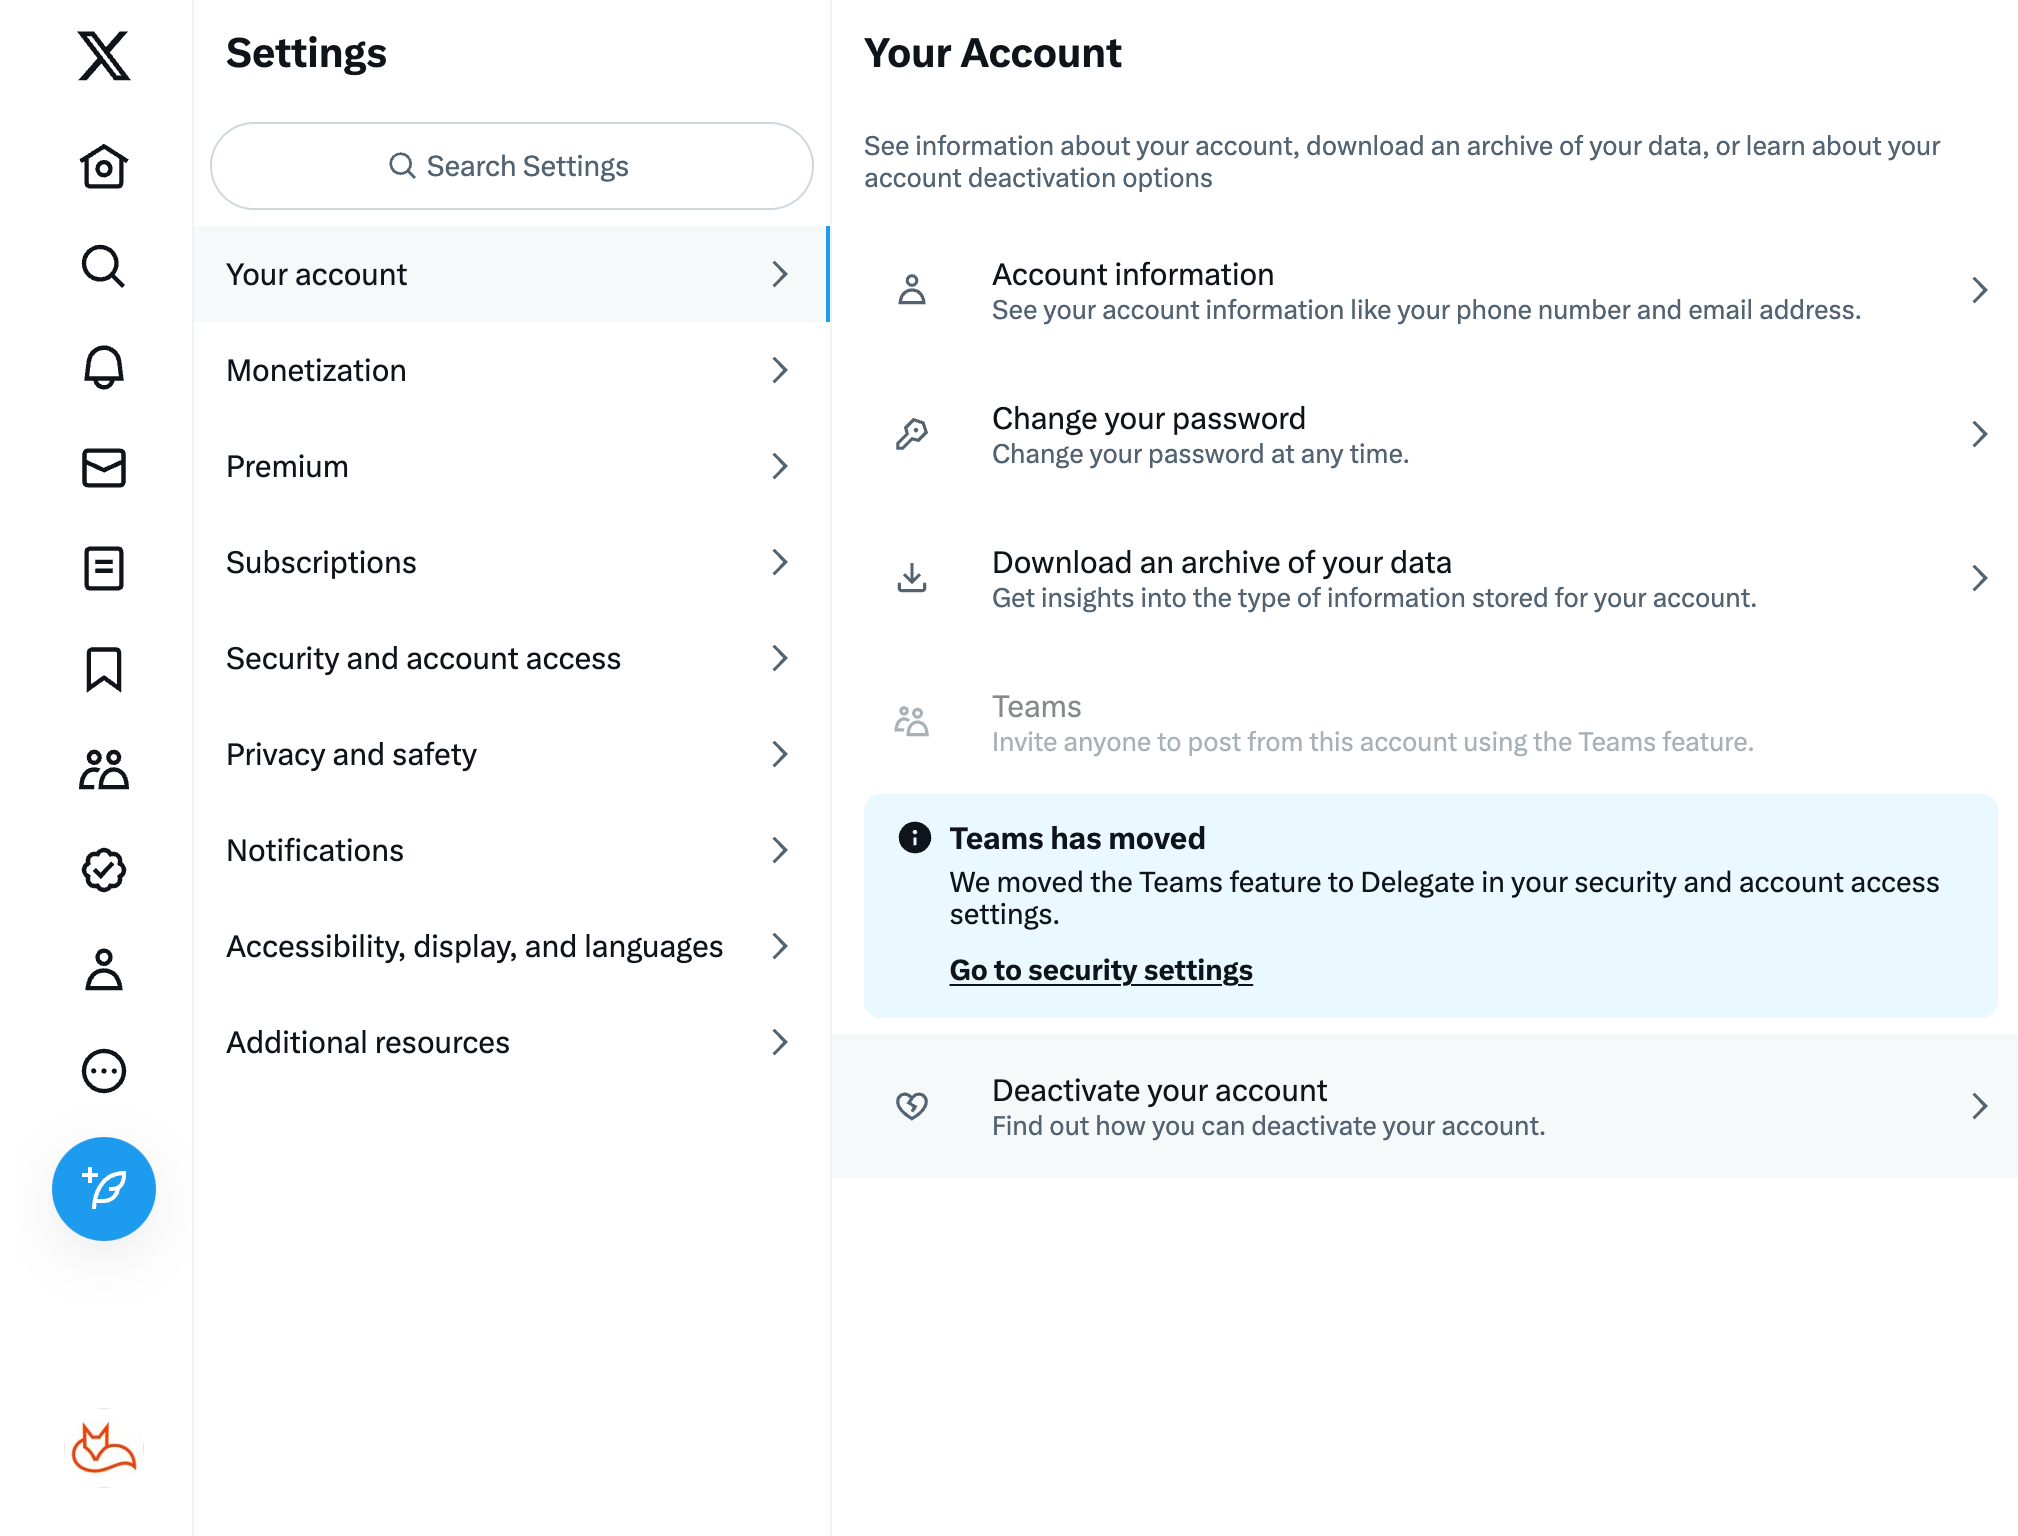 X /  Twitter Settings > Your Account > Deactivate your account